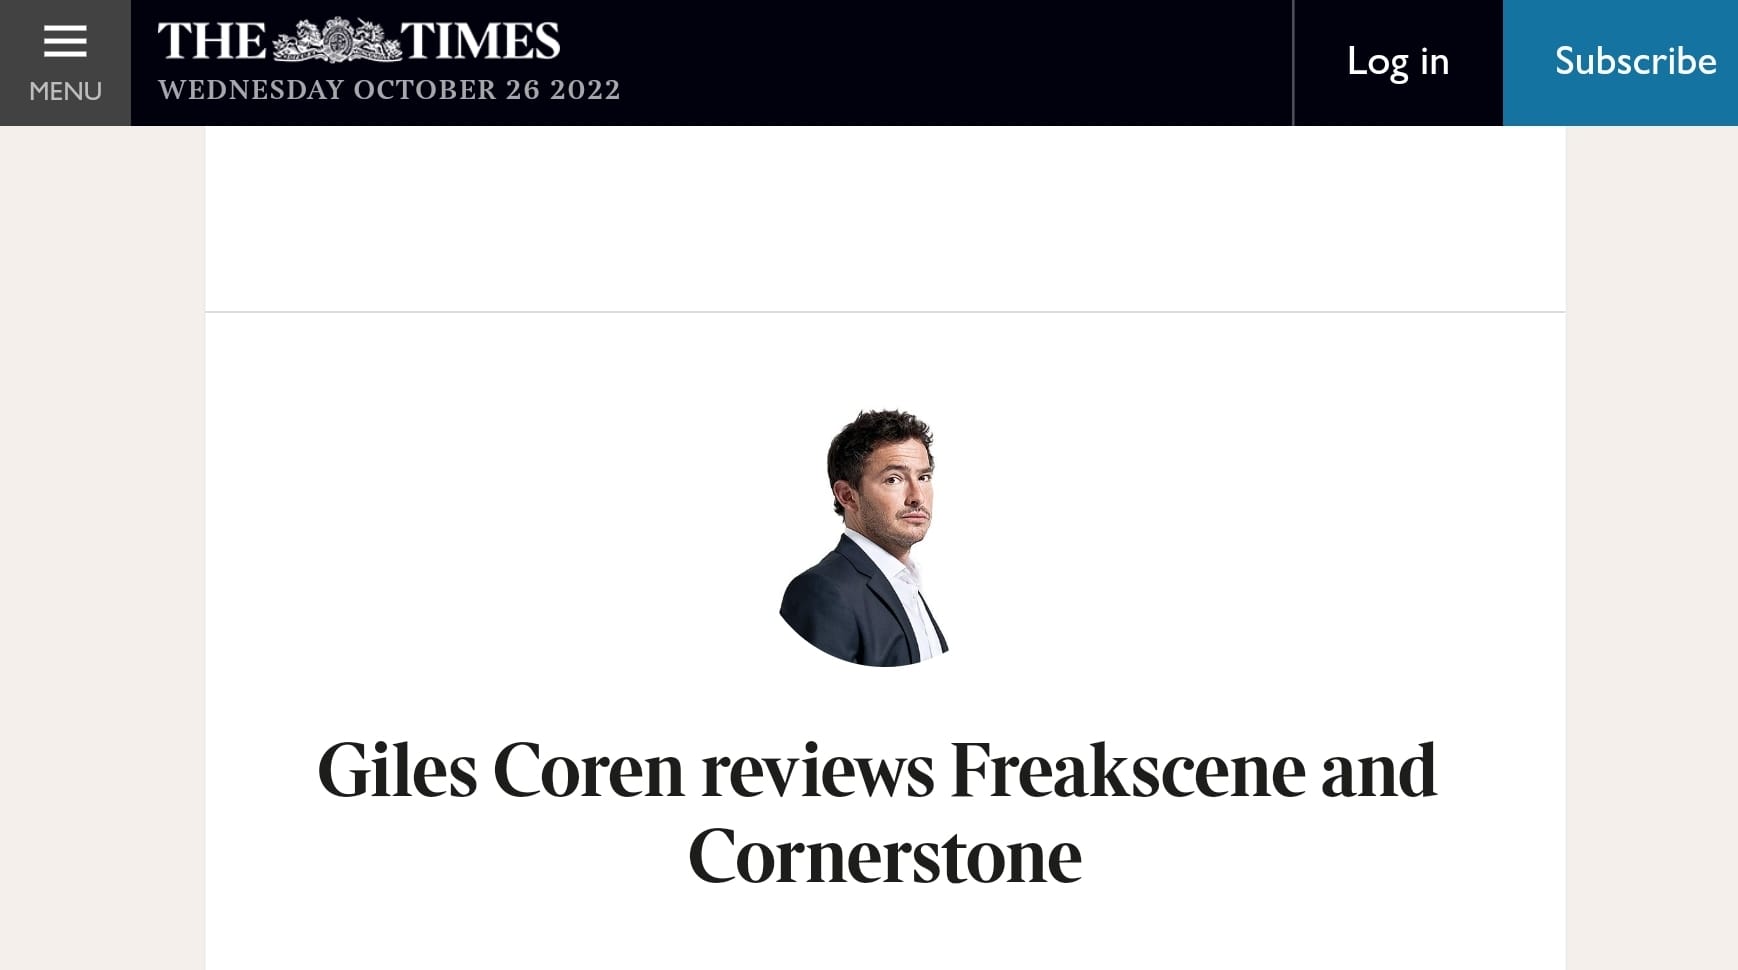 Giles Coren in The Times